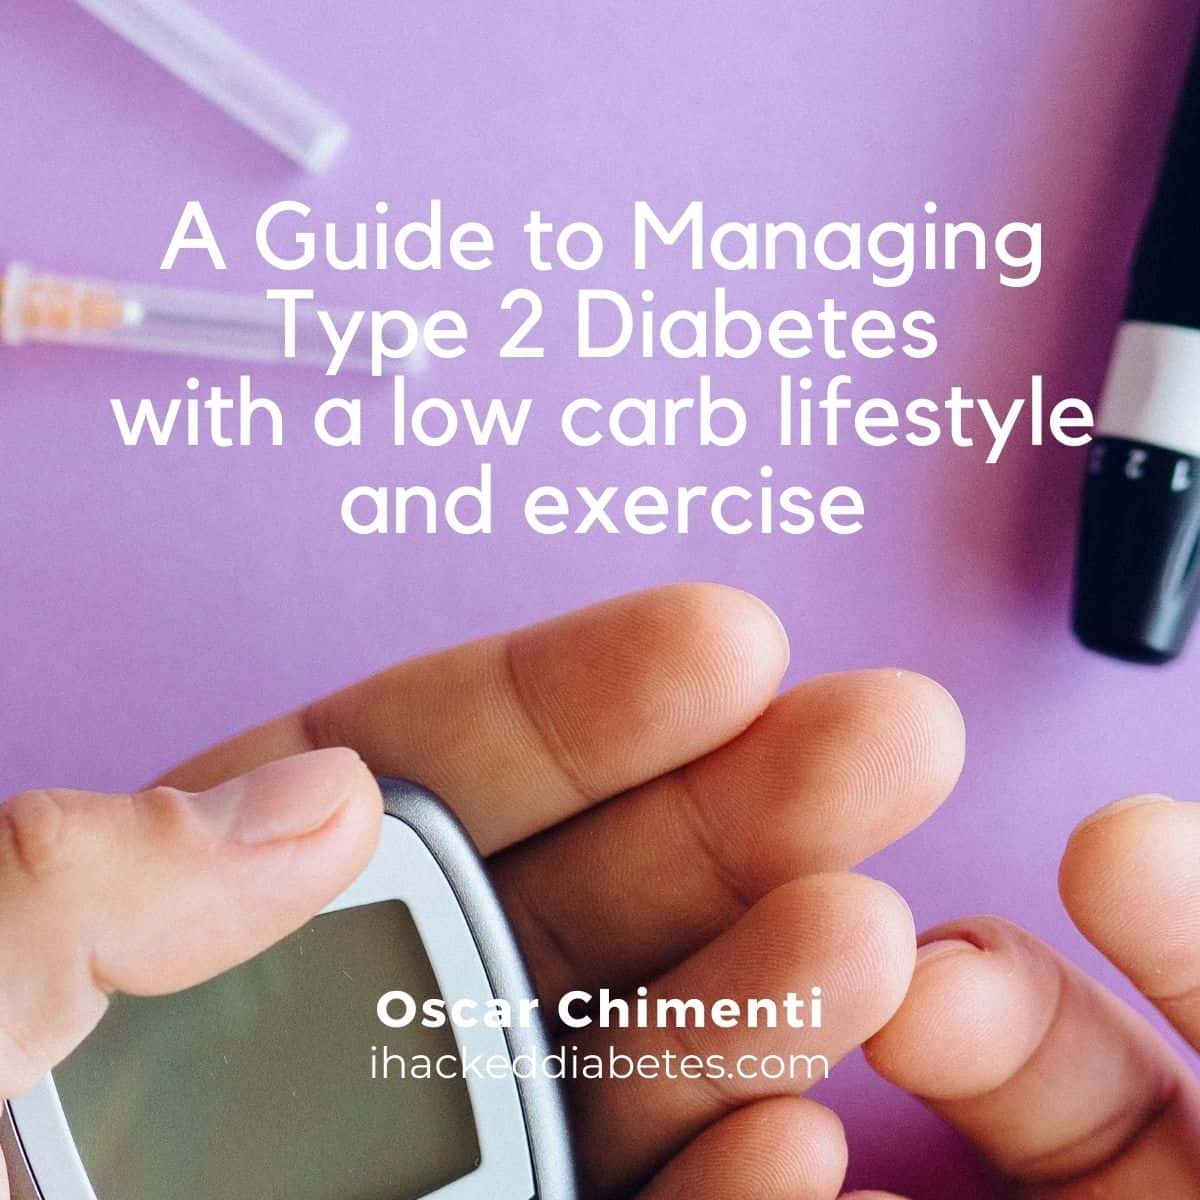 Cover for a guide to managing type 2 diabetes with a low carb lifestyle and exercise.